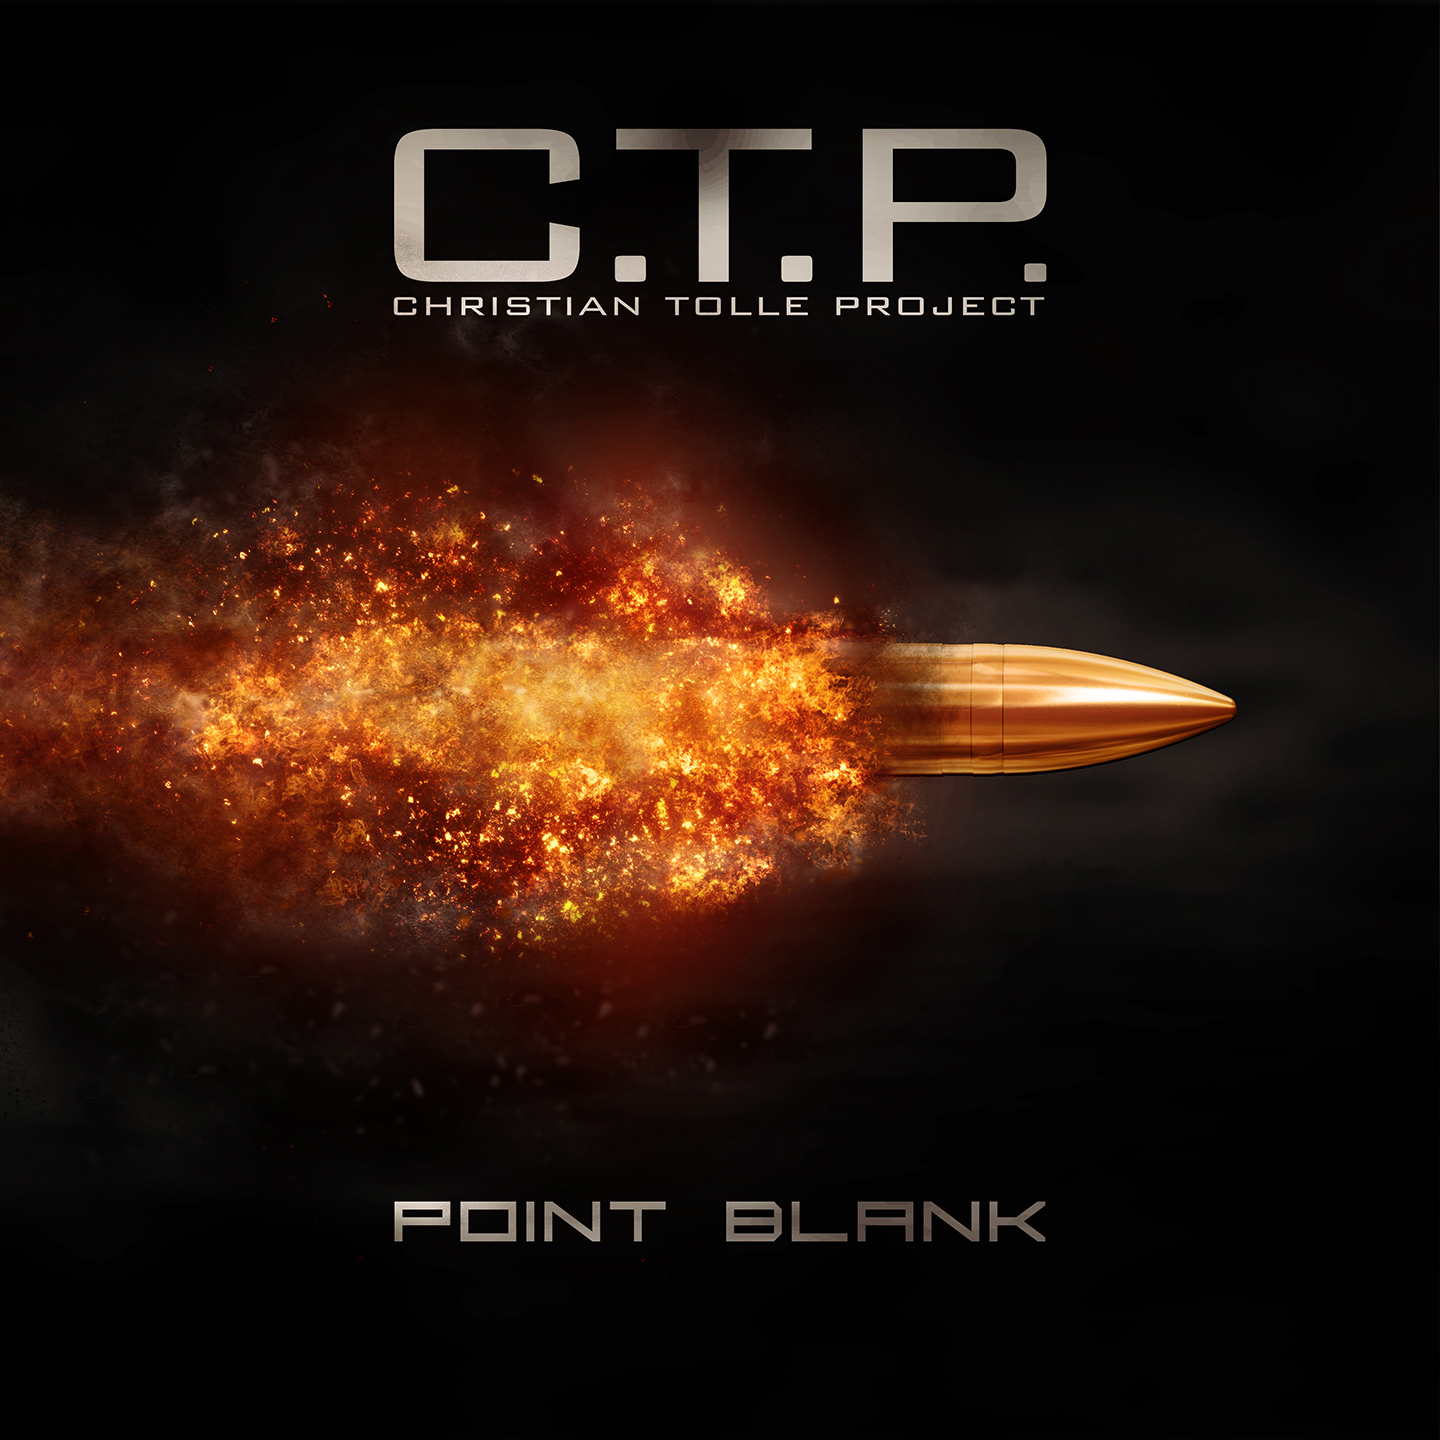 Flac 2018. Christian tolle Project point blank 2018. Christian tolle Project point blank буклет. Dr Project point blank фото. Bonfire point blank 1989.